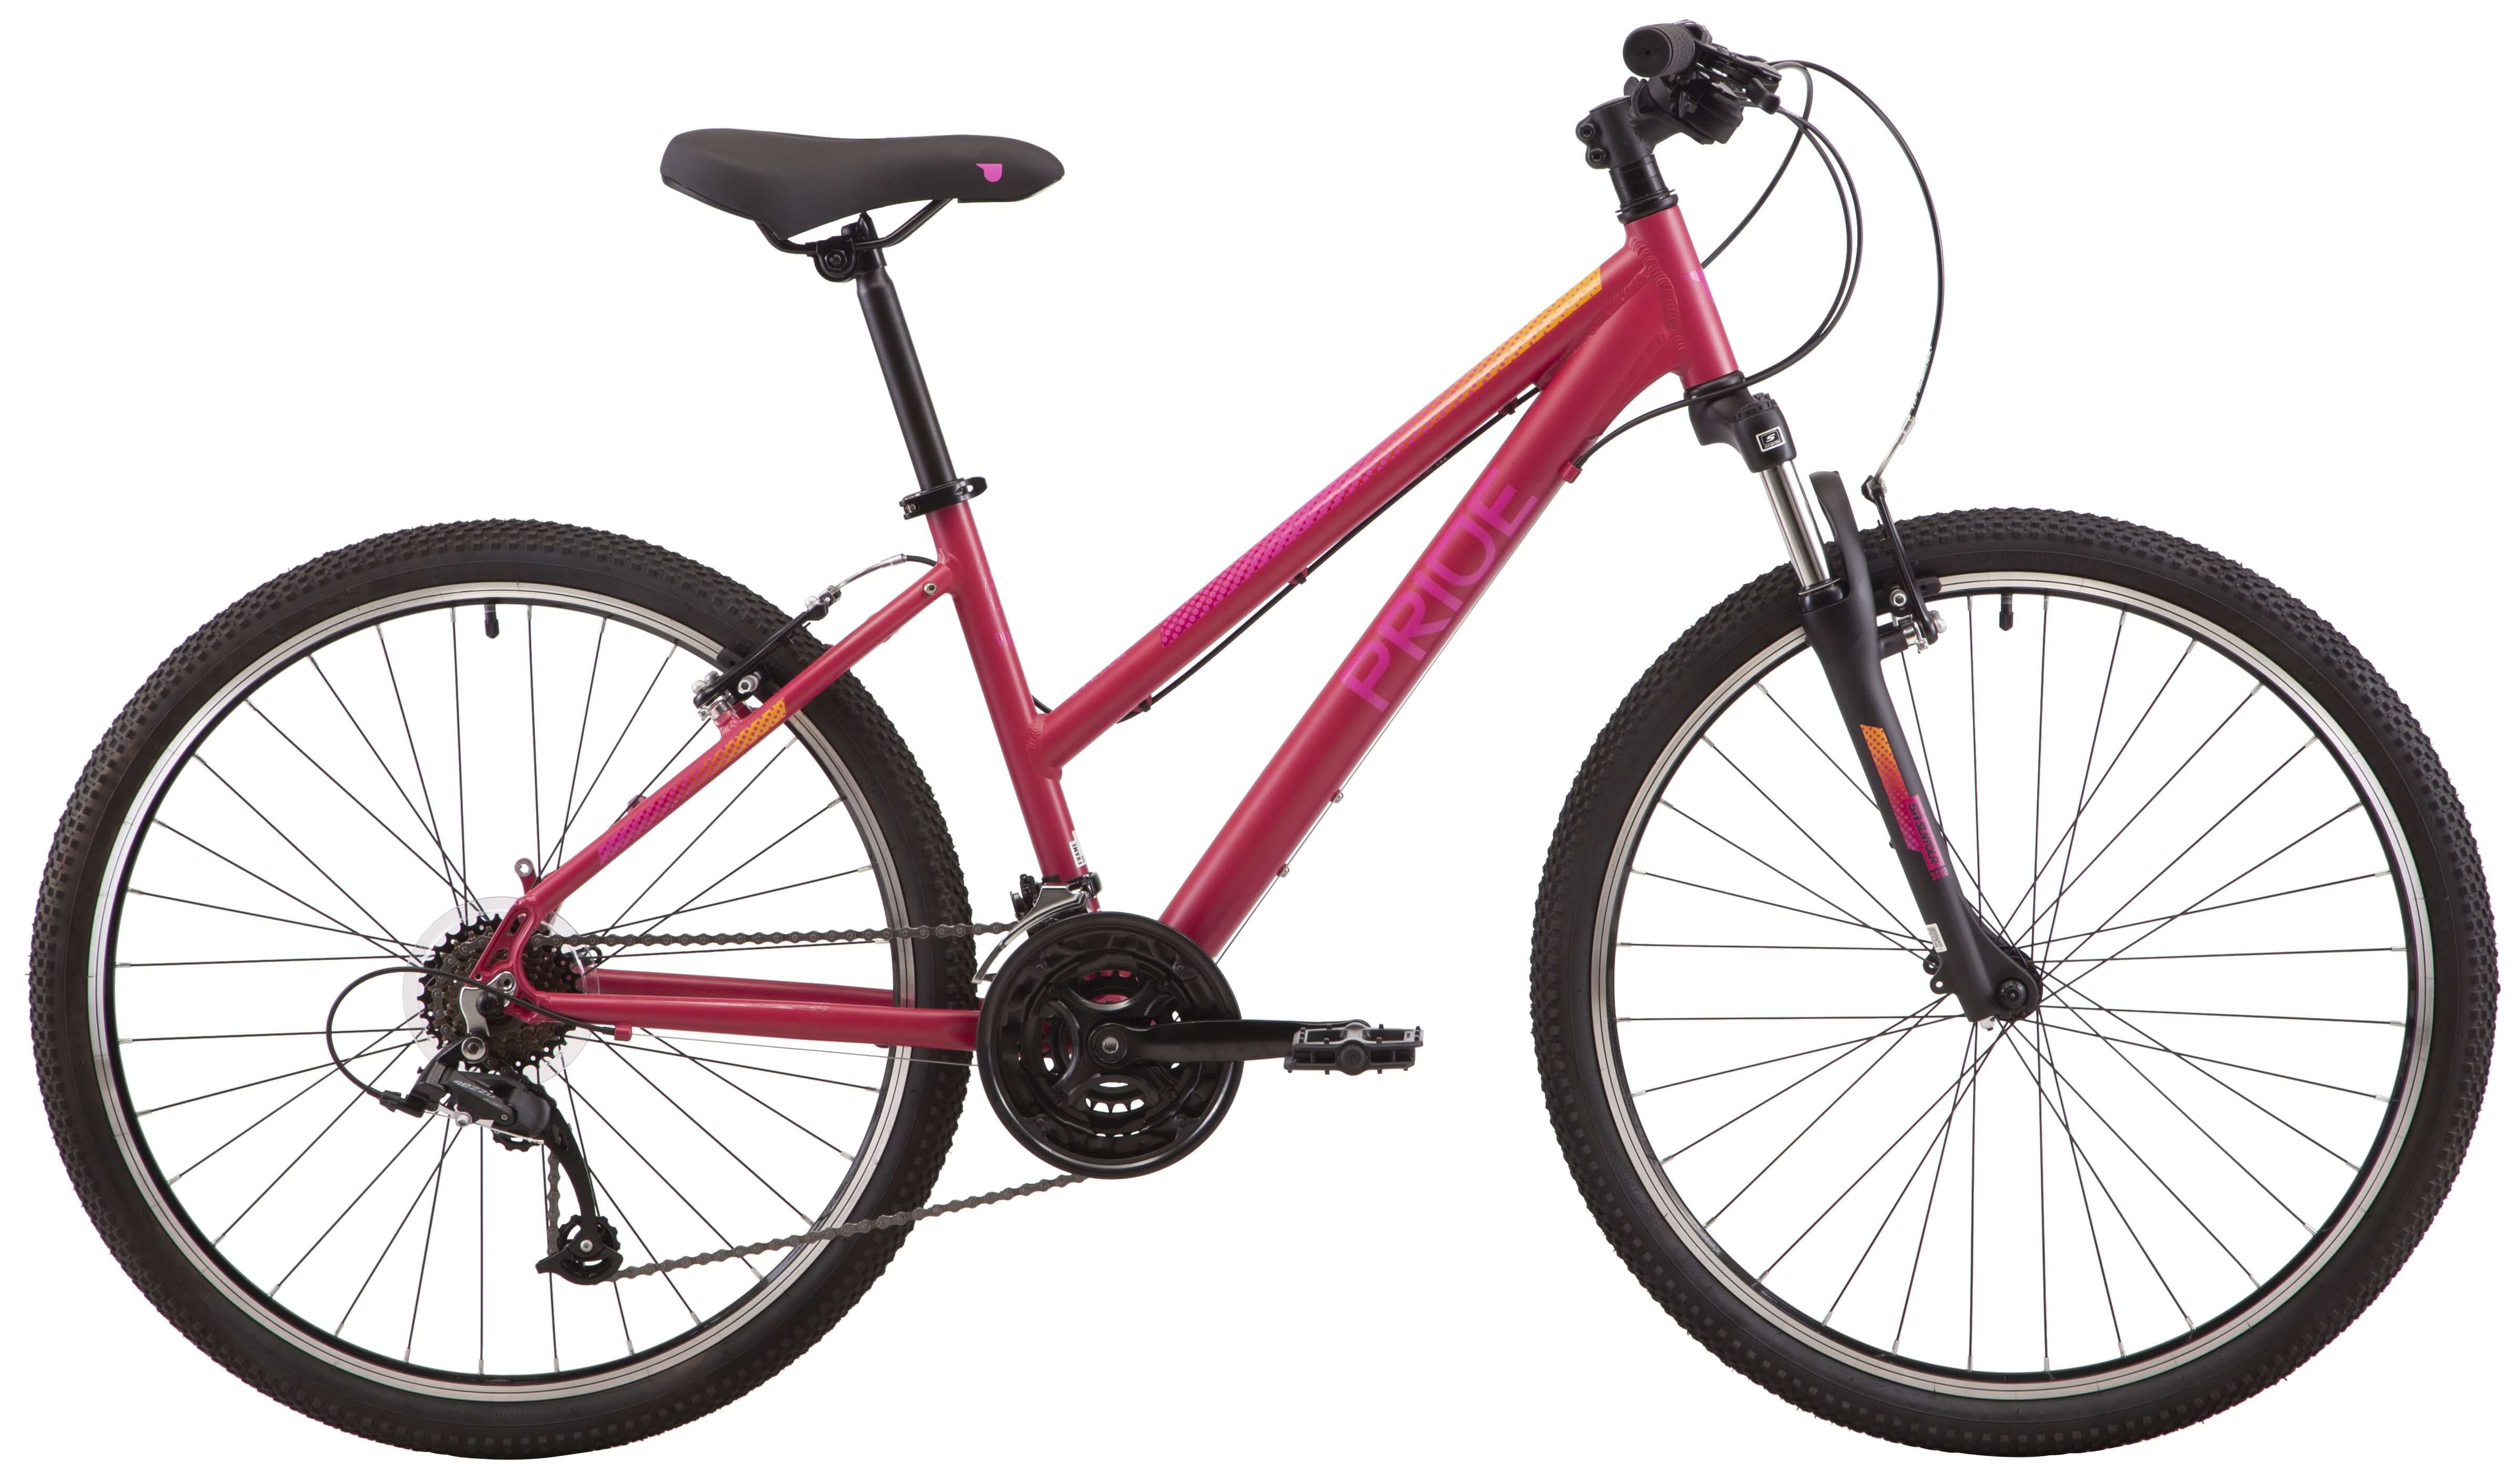 26" Pride Stella 6.1 frame - M 2022 Burgundy (rear and front switches and tamnet - Microshift) Photo